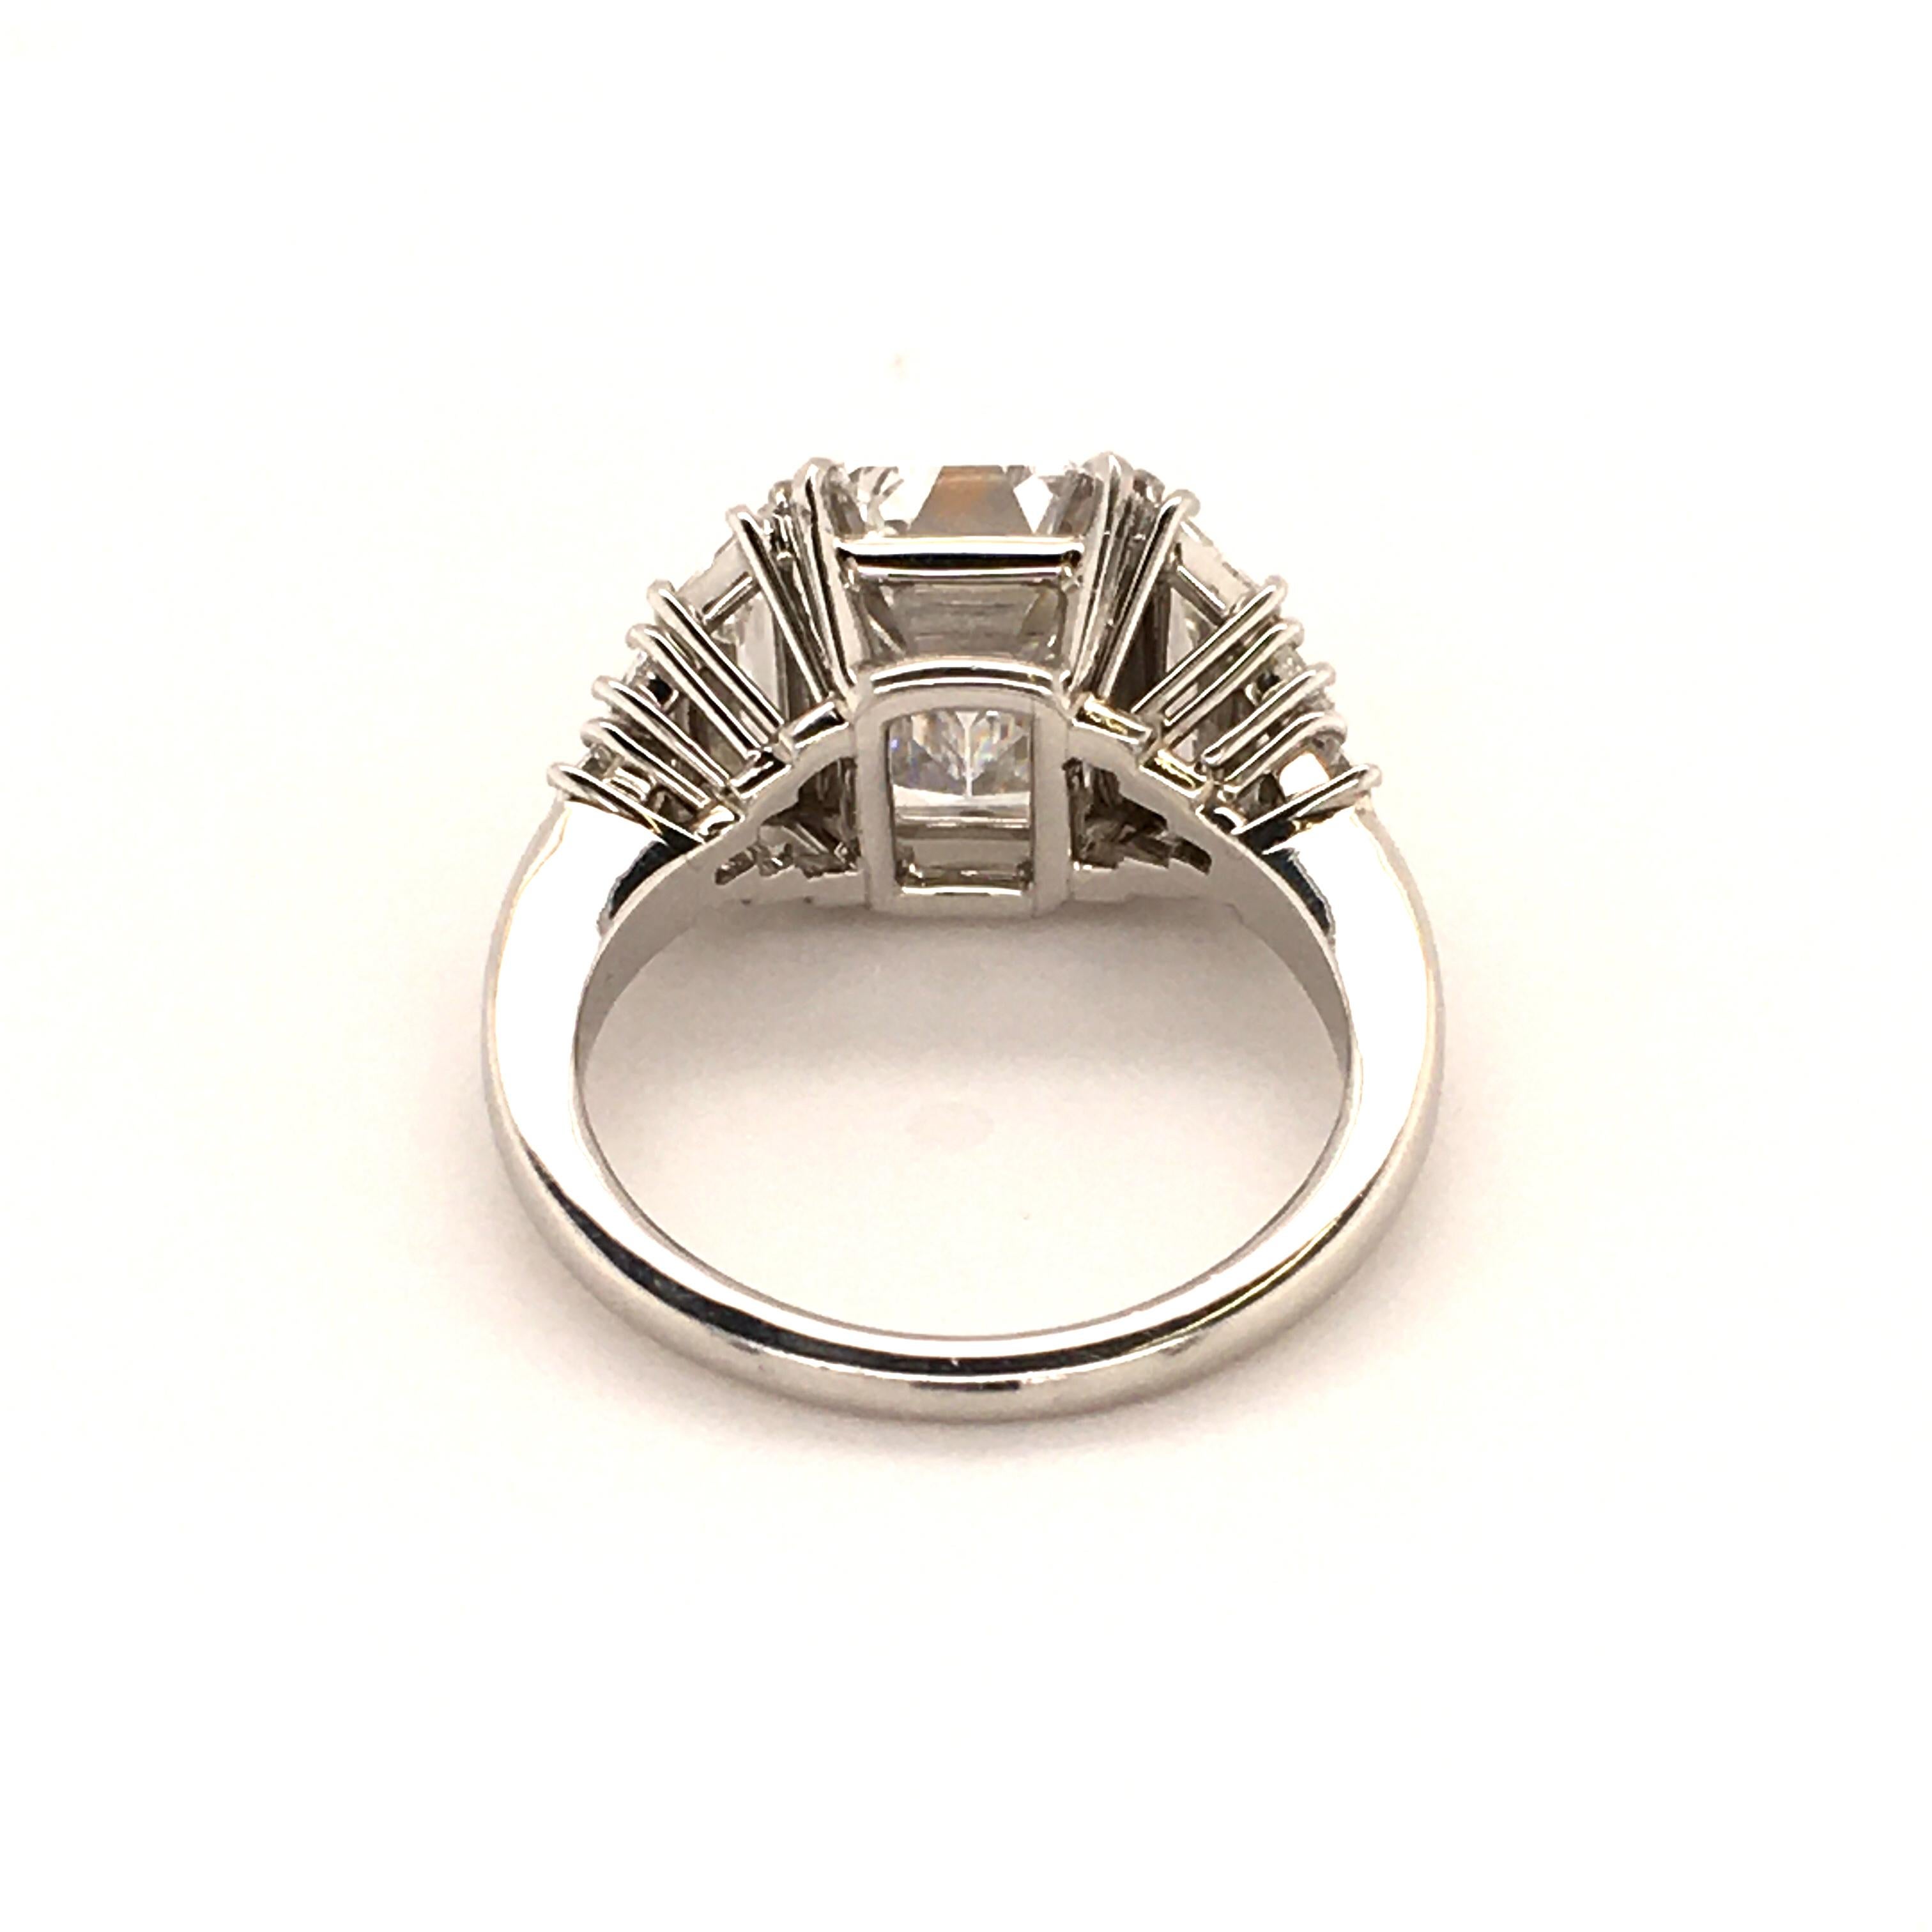 Harry Winston GIA Certified 4.63 Carat Emerald Cut Diamond Ring in Platinum 950 In Excellent Condition For Sale In Lucerne, CH